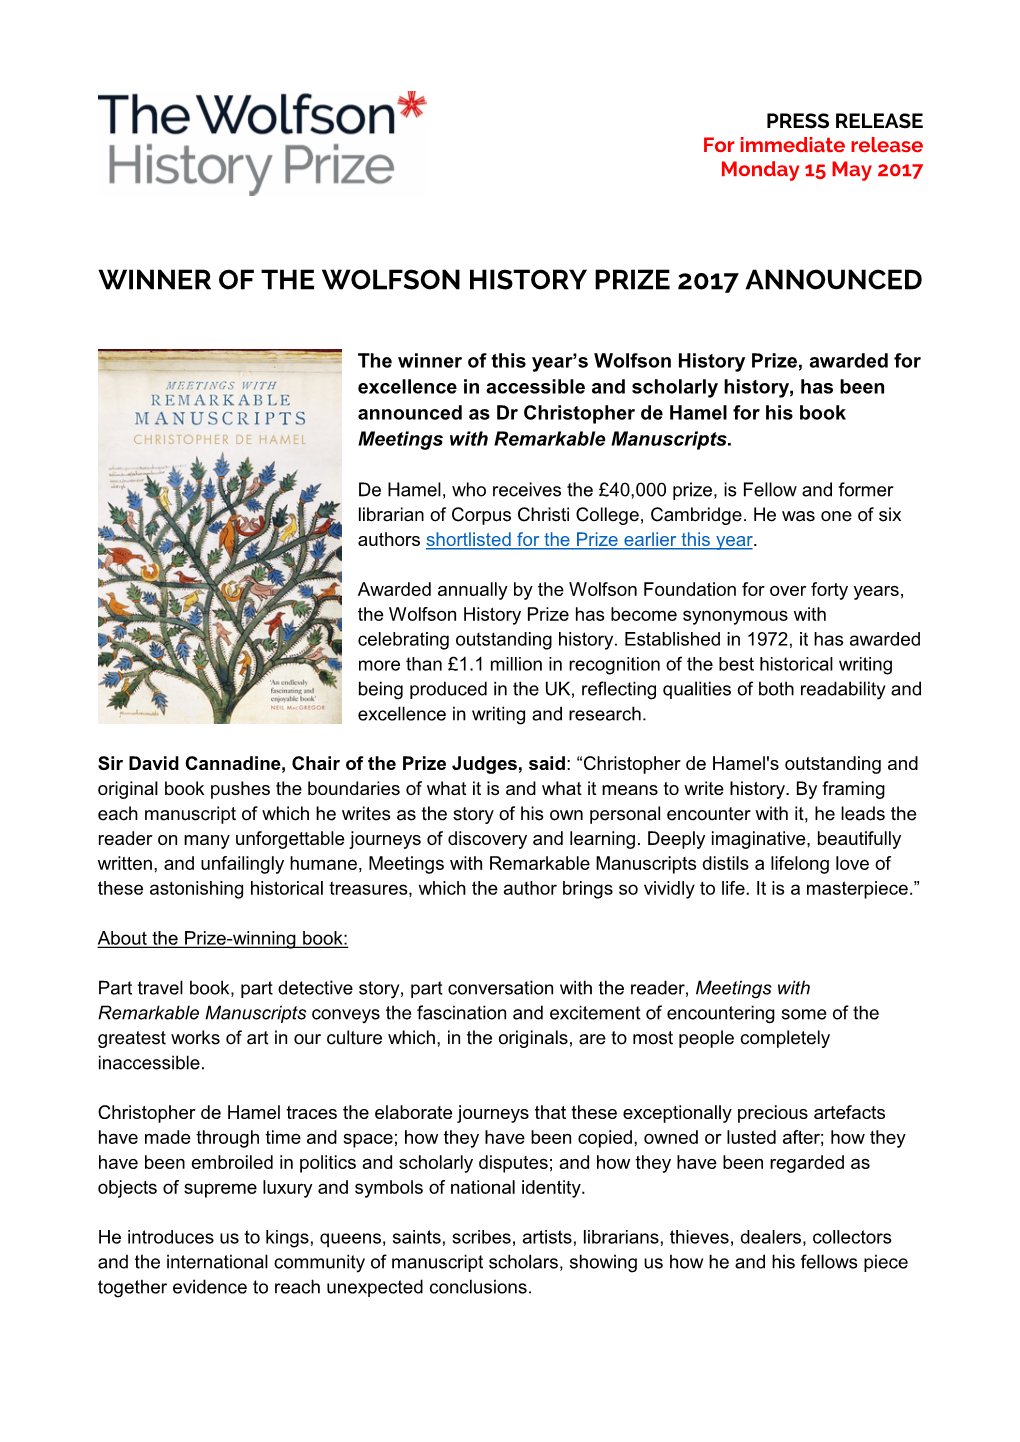 Winner of the Wolfson History Prize 2017 Announced